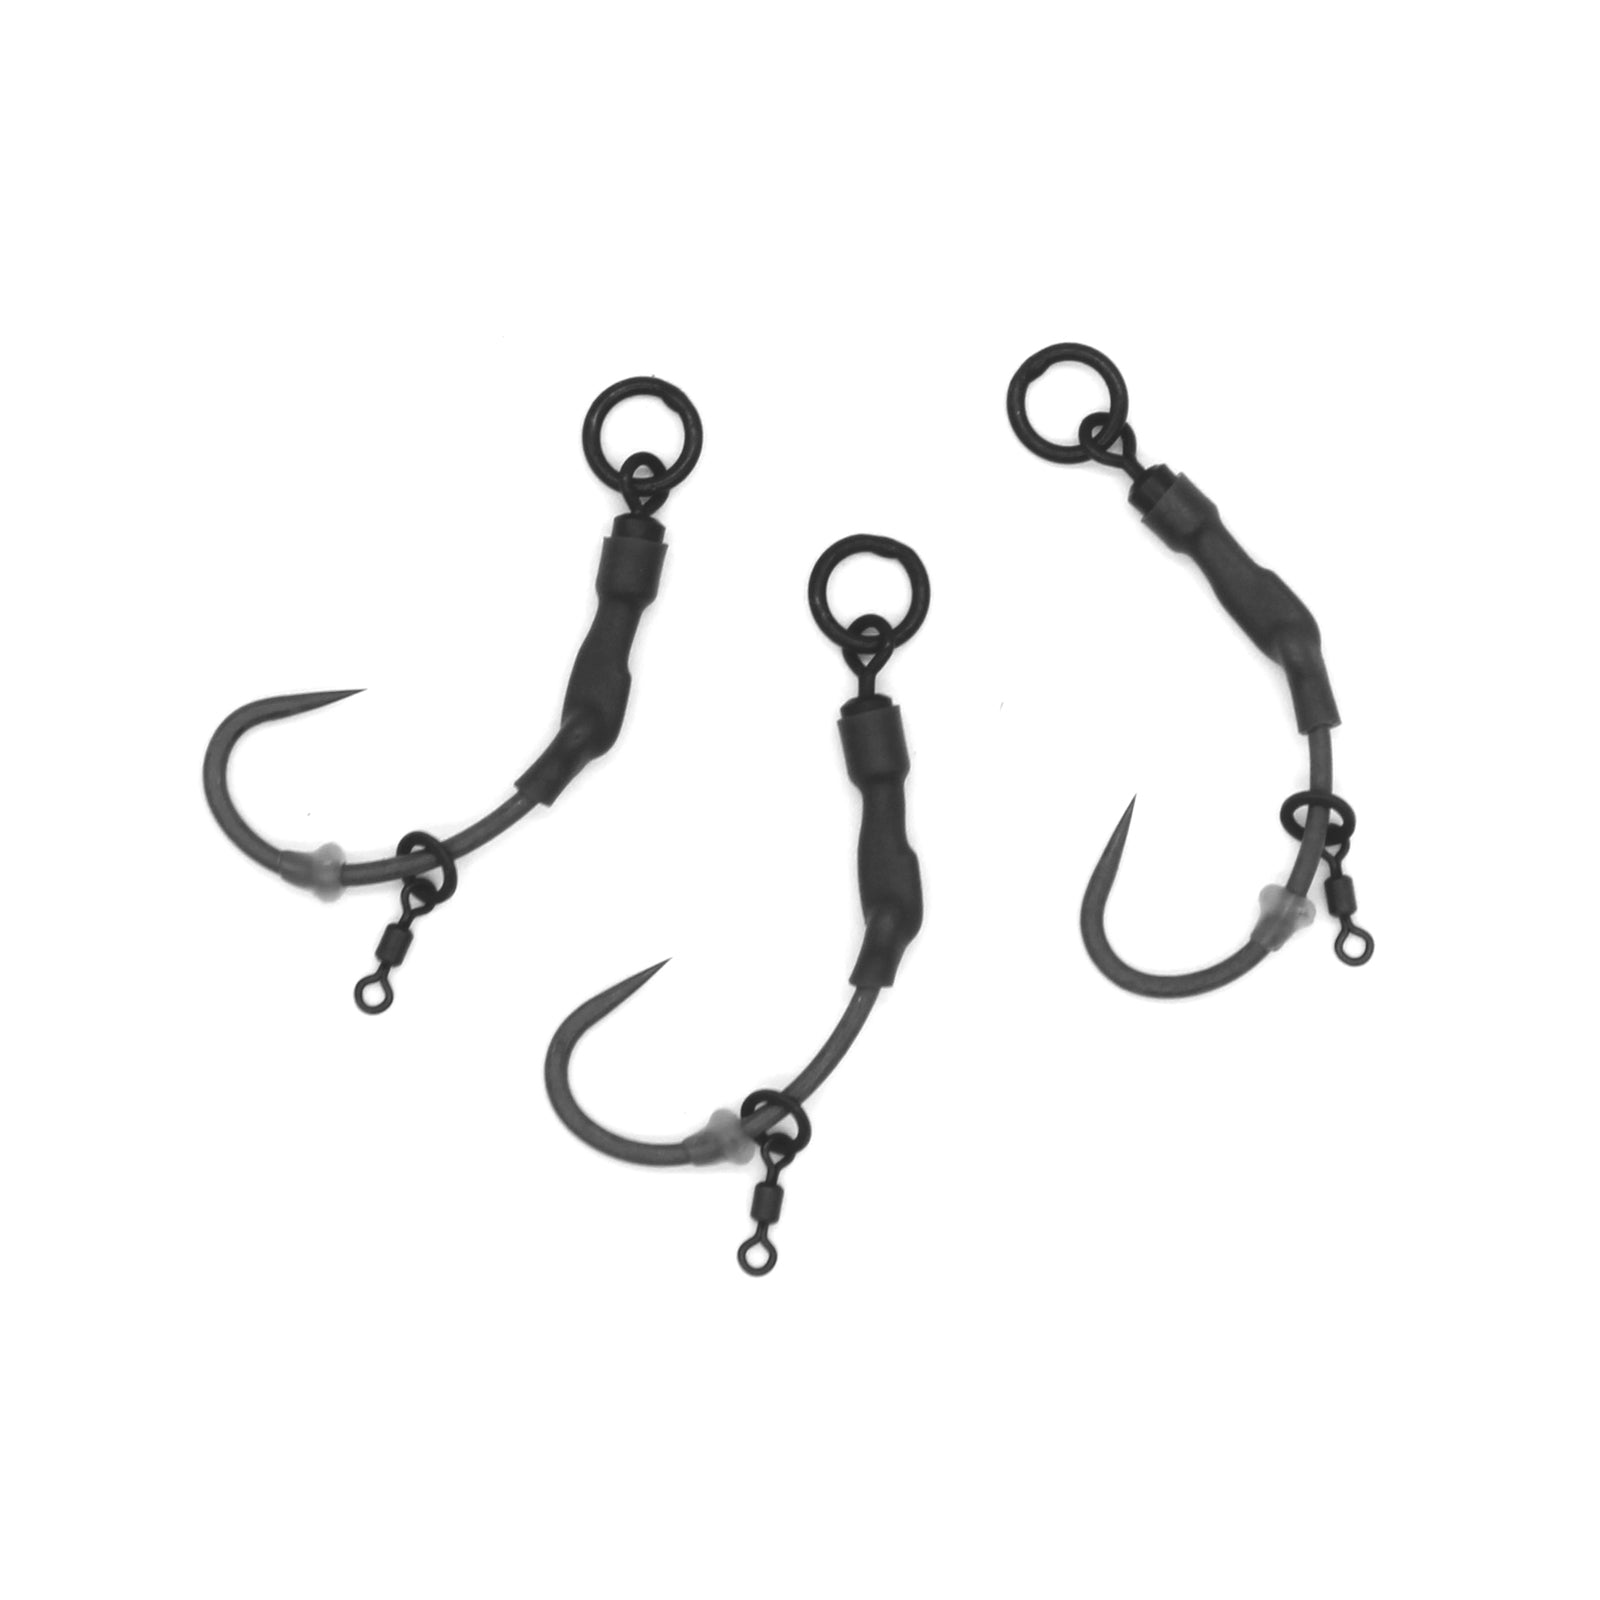 Deception Angling Barbless Ronnie Rig Fishing Hooks with Micro Swivel Pack of 3